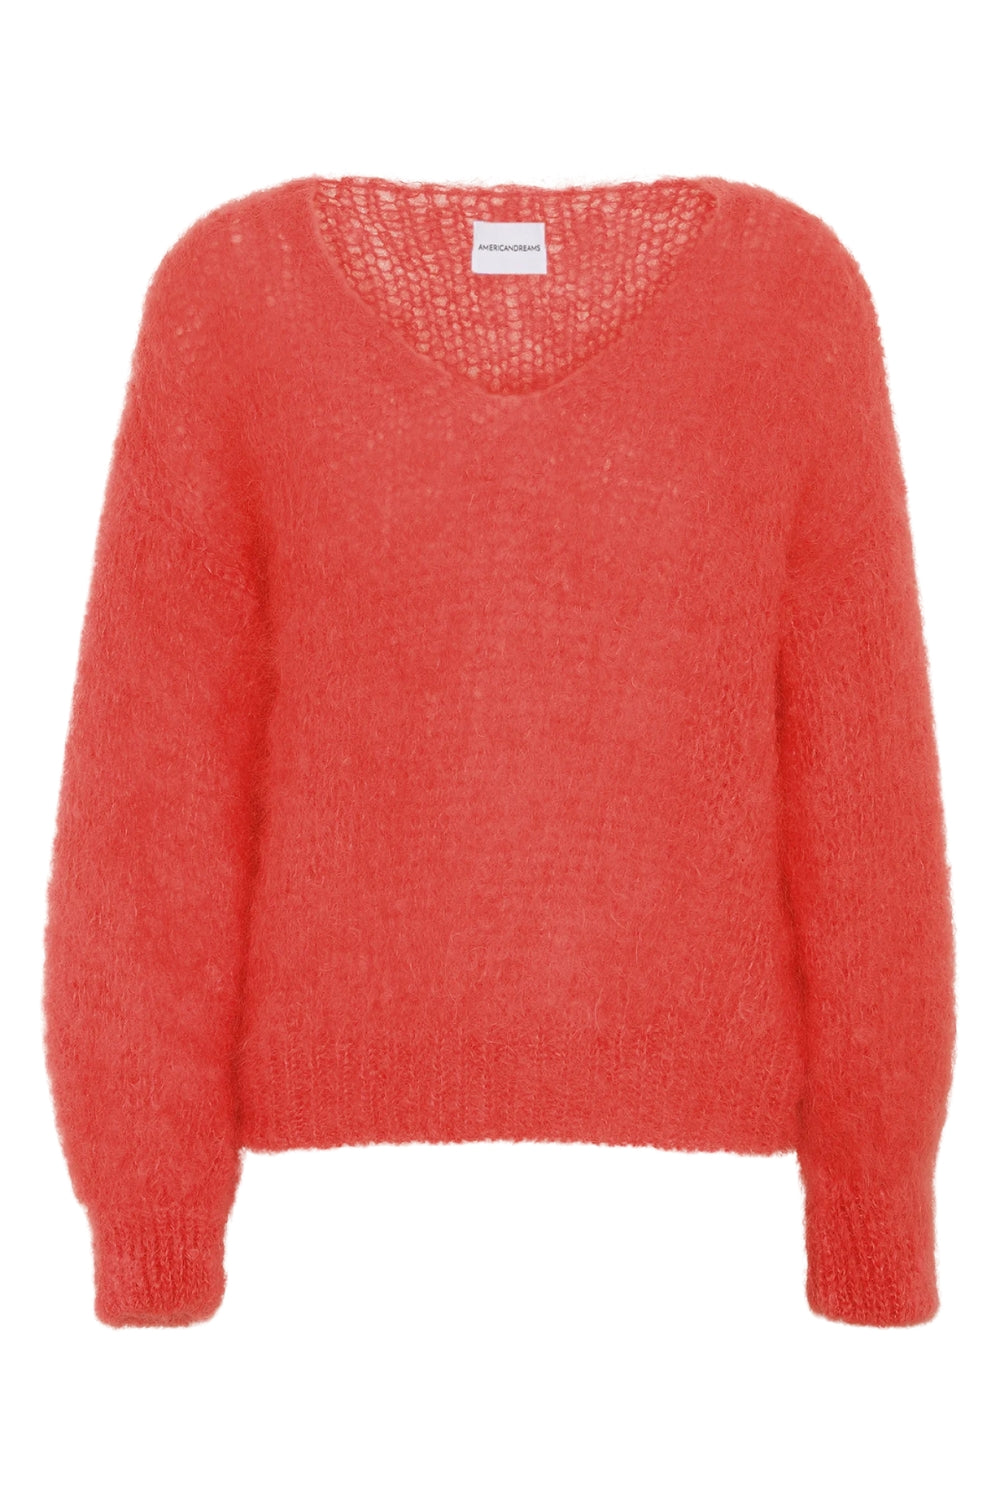 American Dreams | Milana Mohair Knit | Coral Red